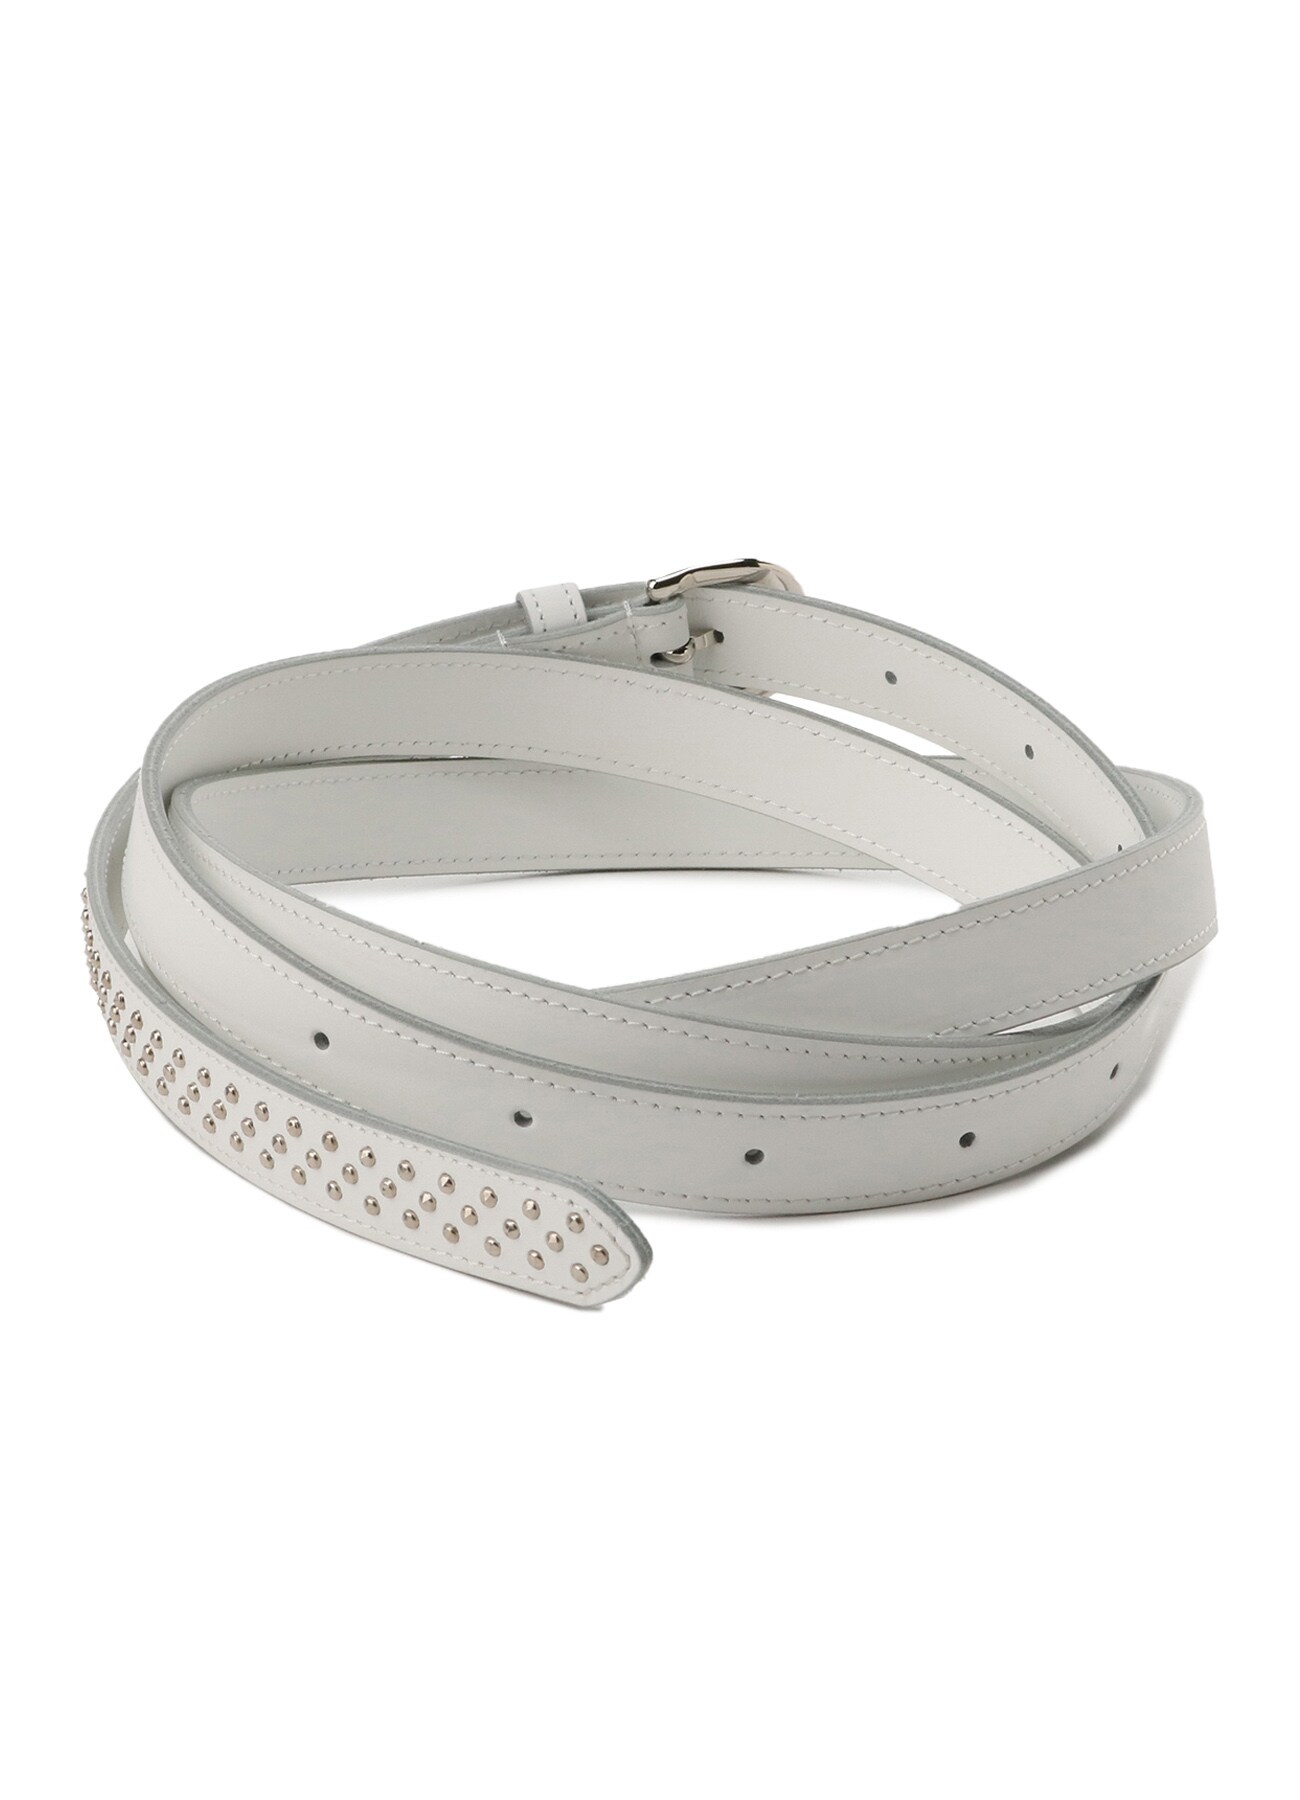 Buy Womens Genuine Leather Studded Belt for CAD 50.00